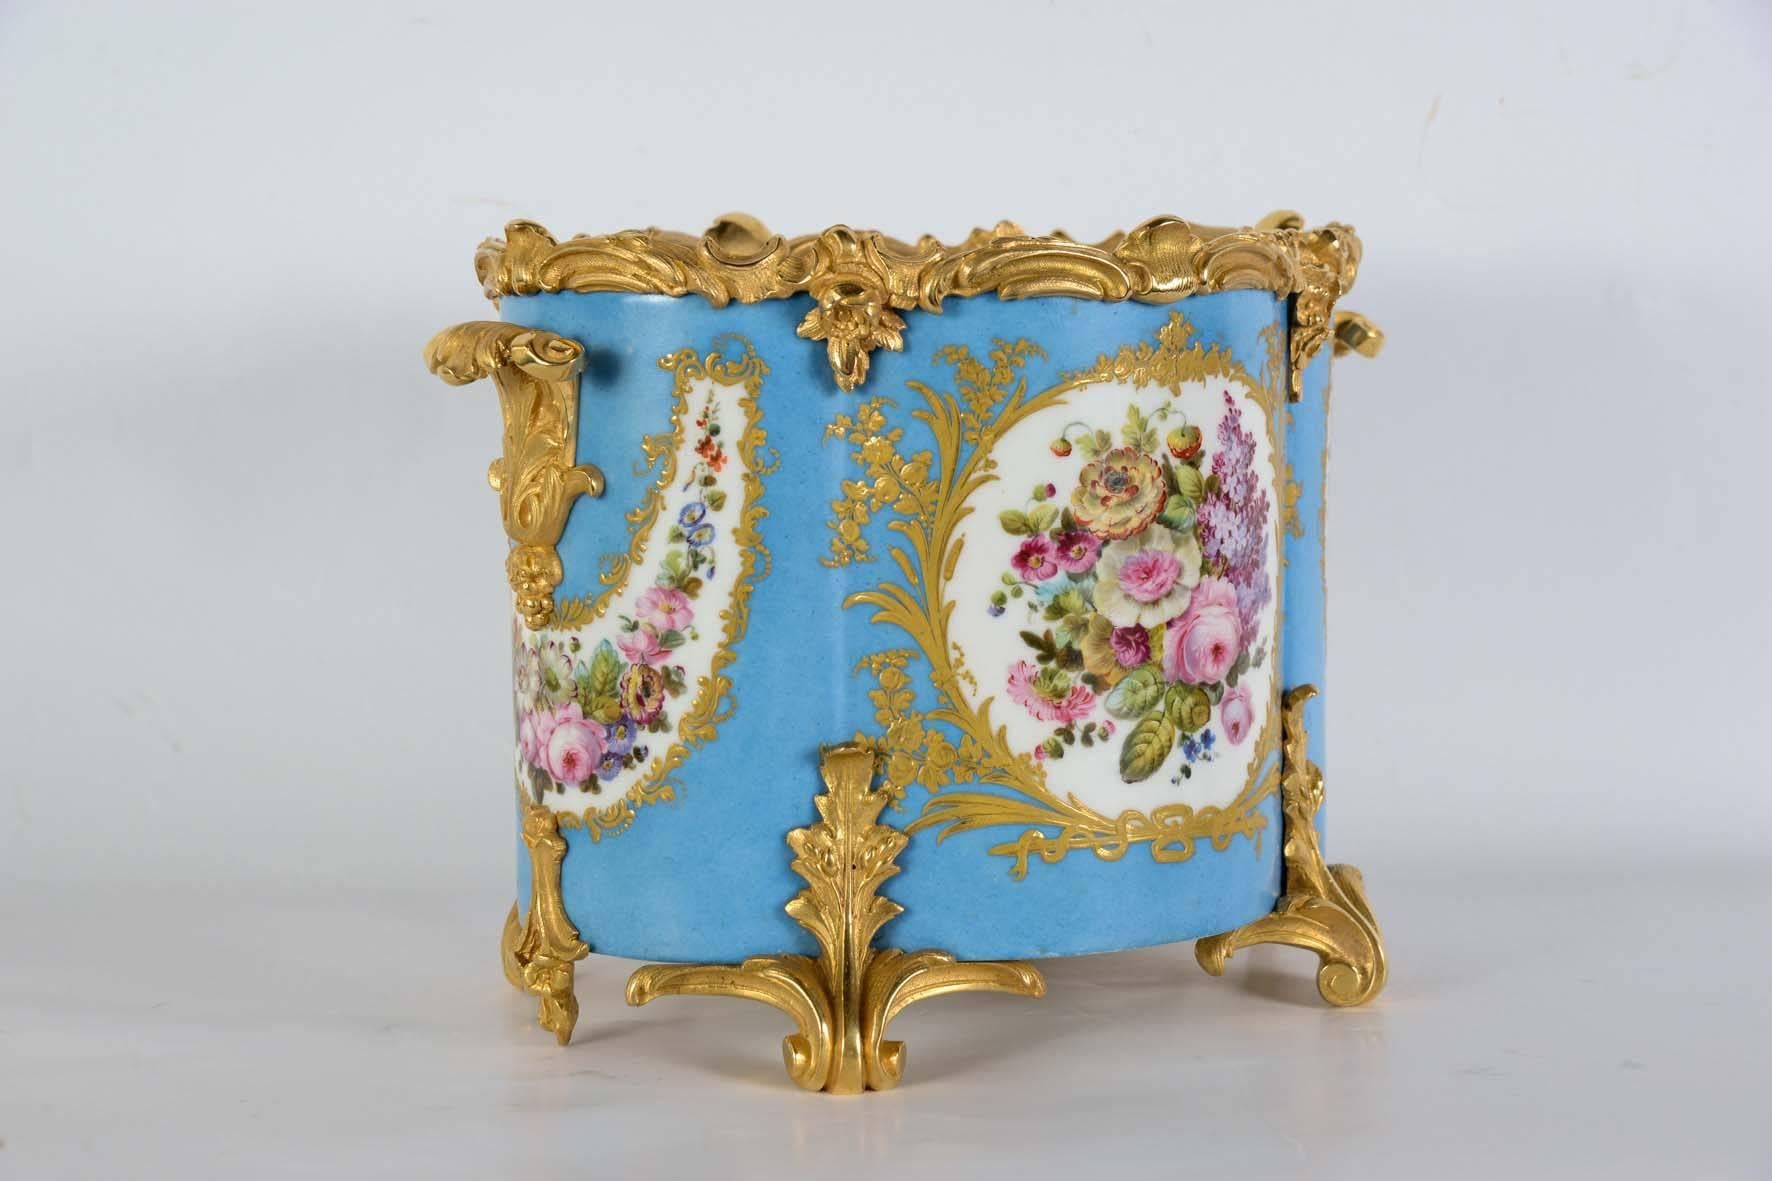 Jardinière by Sèvres, decorated with flowers on one side and angels on the other side, hand-painted.
Ornamented with gilt bronzes very finely chiseled.
Original Bowl interior is in metal painted.